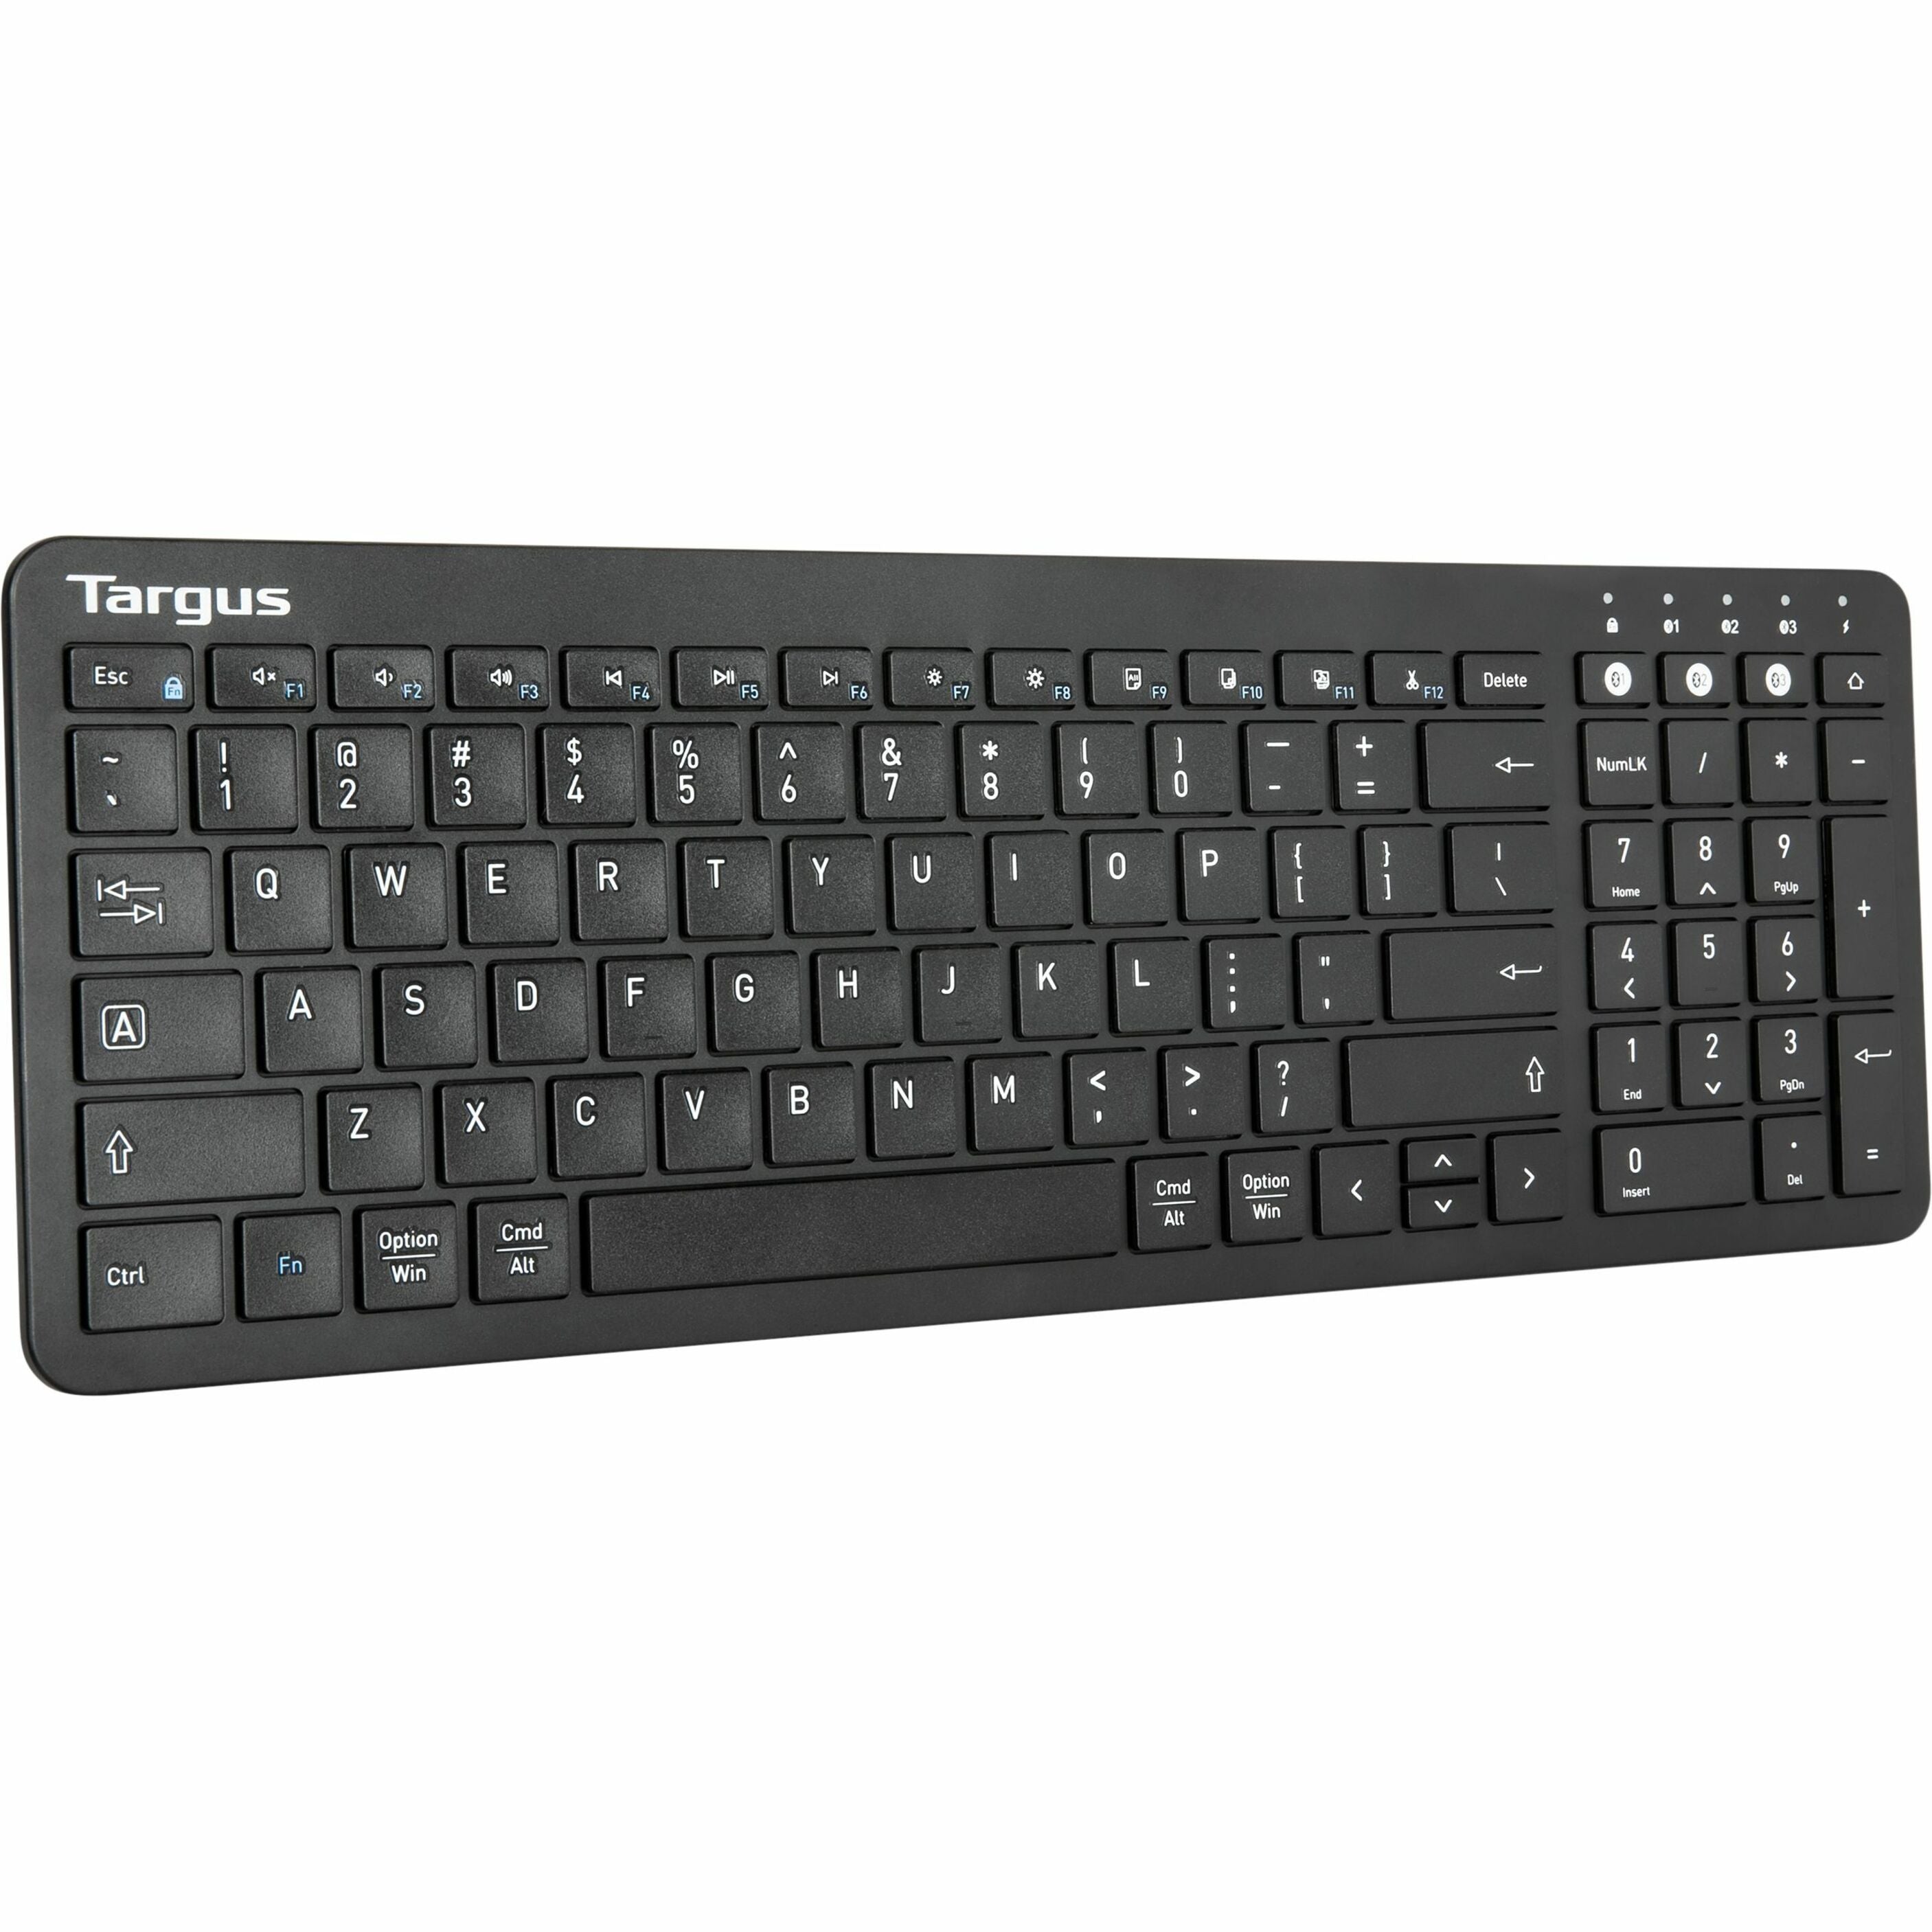 Targus AKB863US Midsize Multi-Device Wireless Keyboard w/Antimicrobial DefenseGuard, Slim, Multi-host Support, Ergonomic, Rechargeable Battery